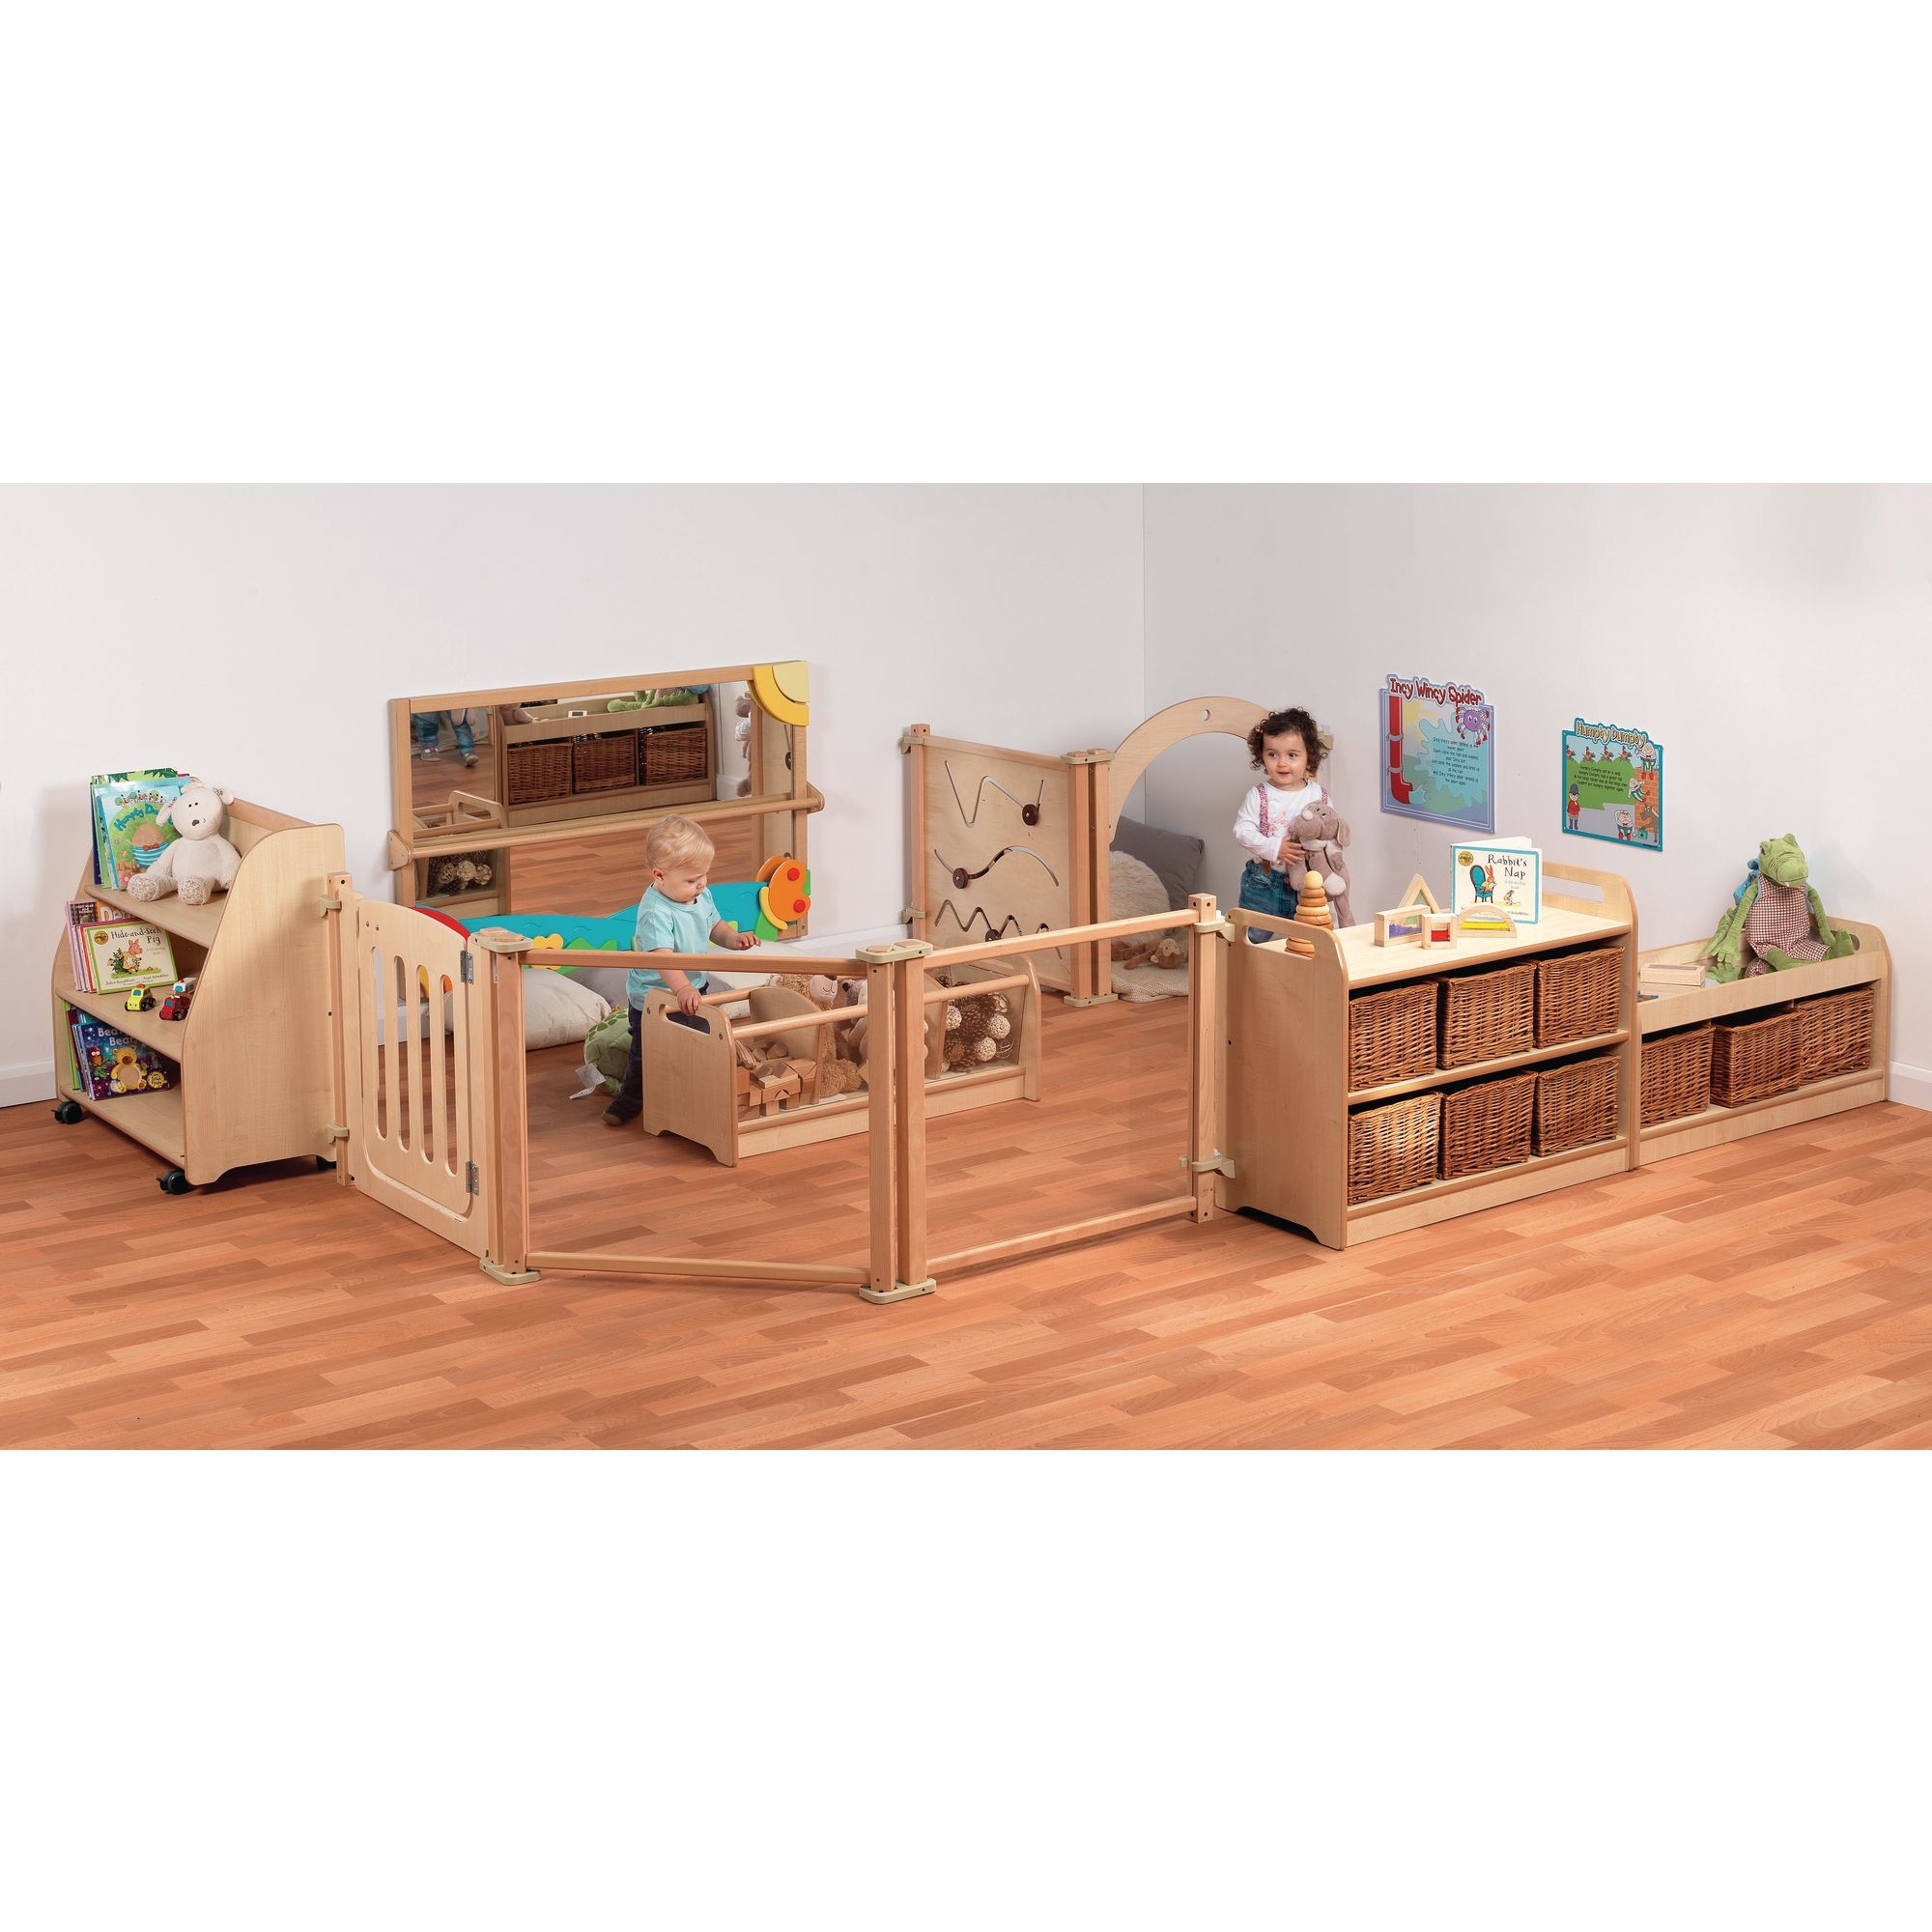 Playscapes Playscapes Baby Zone